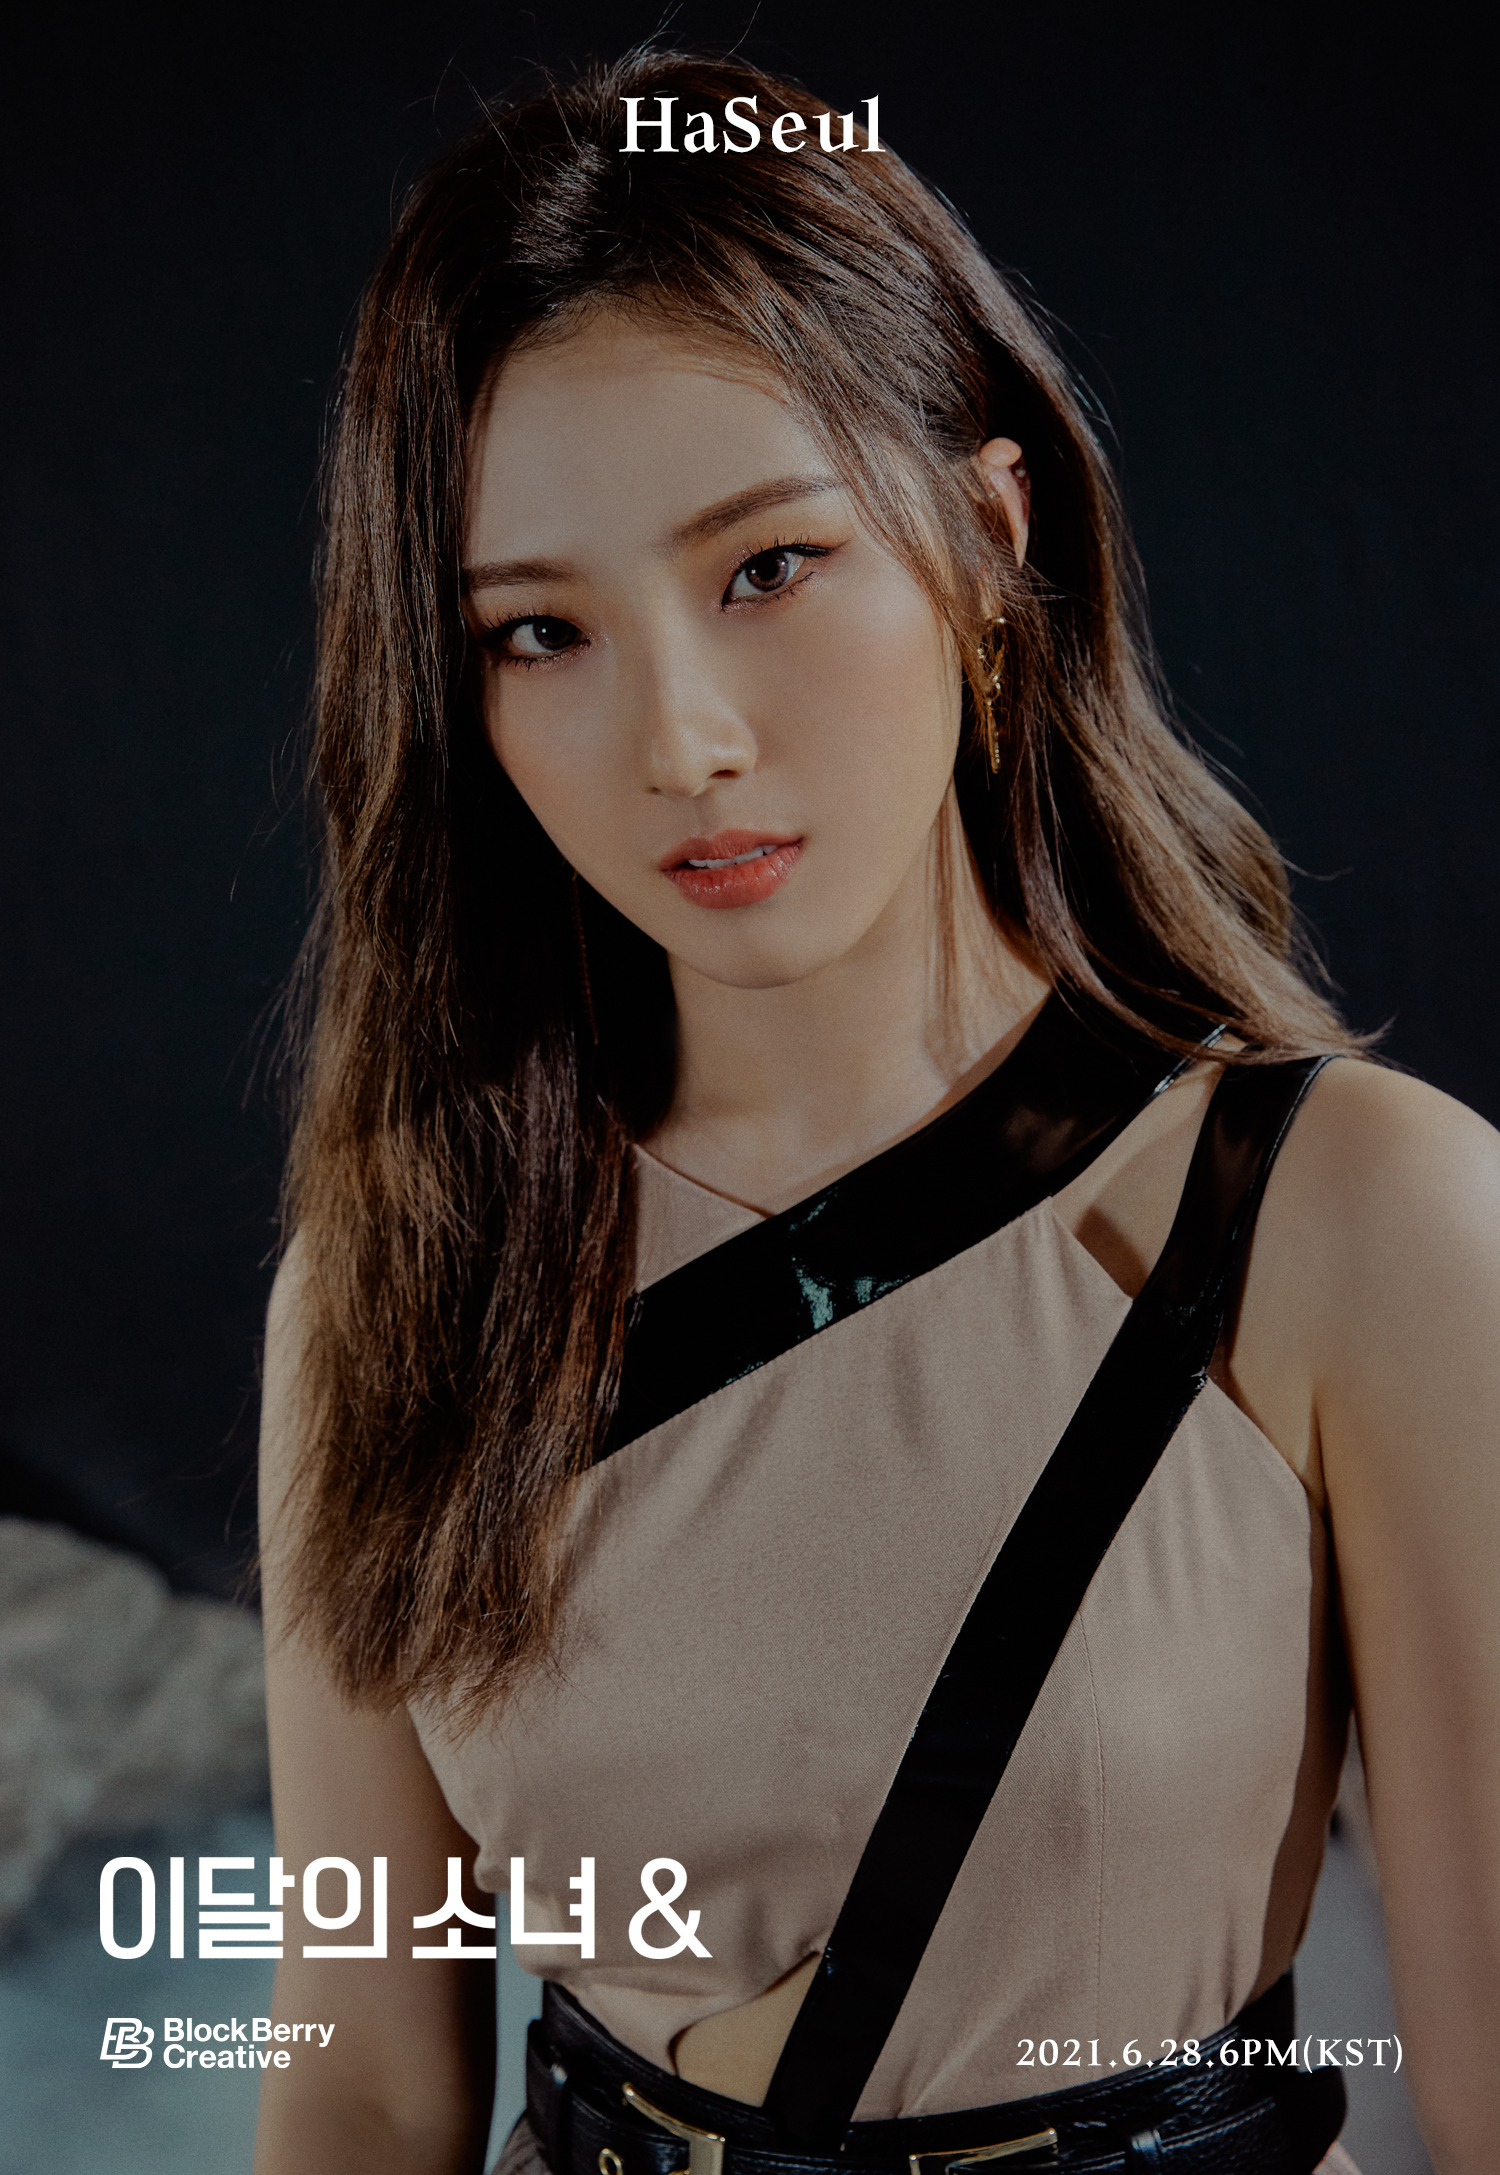 Haseul (LOONA Member) Age, Bio, Wiki, Facts & More